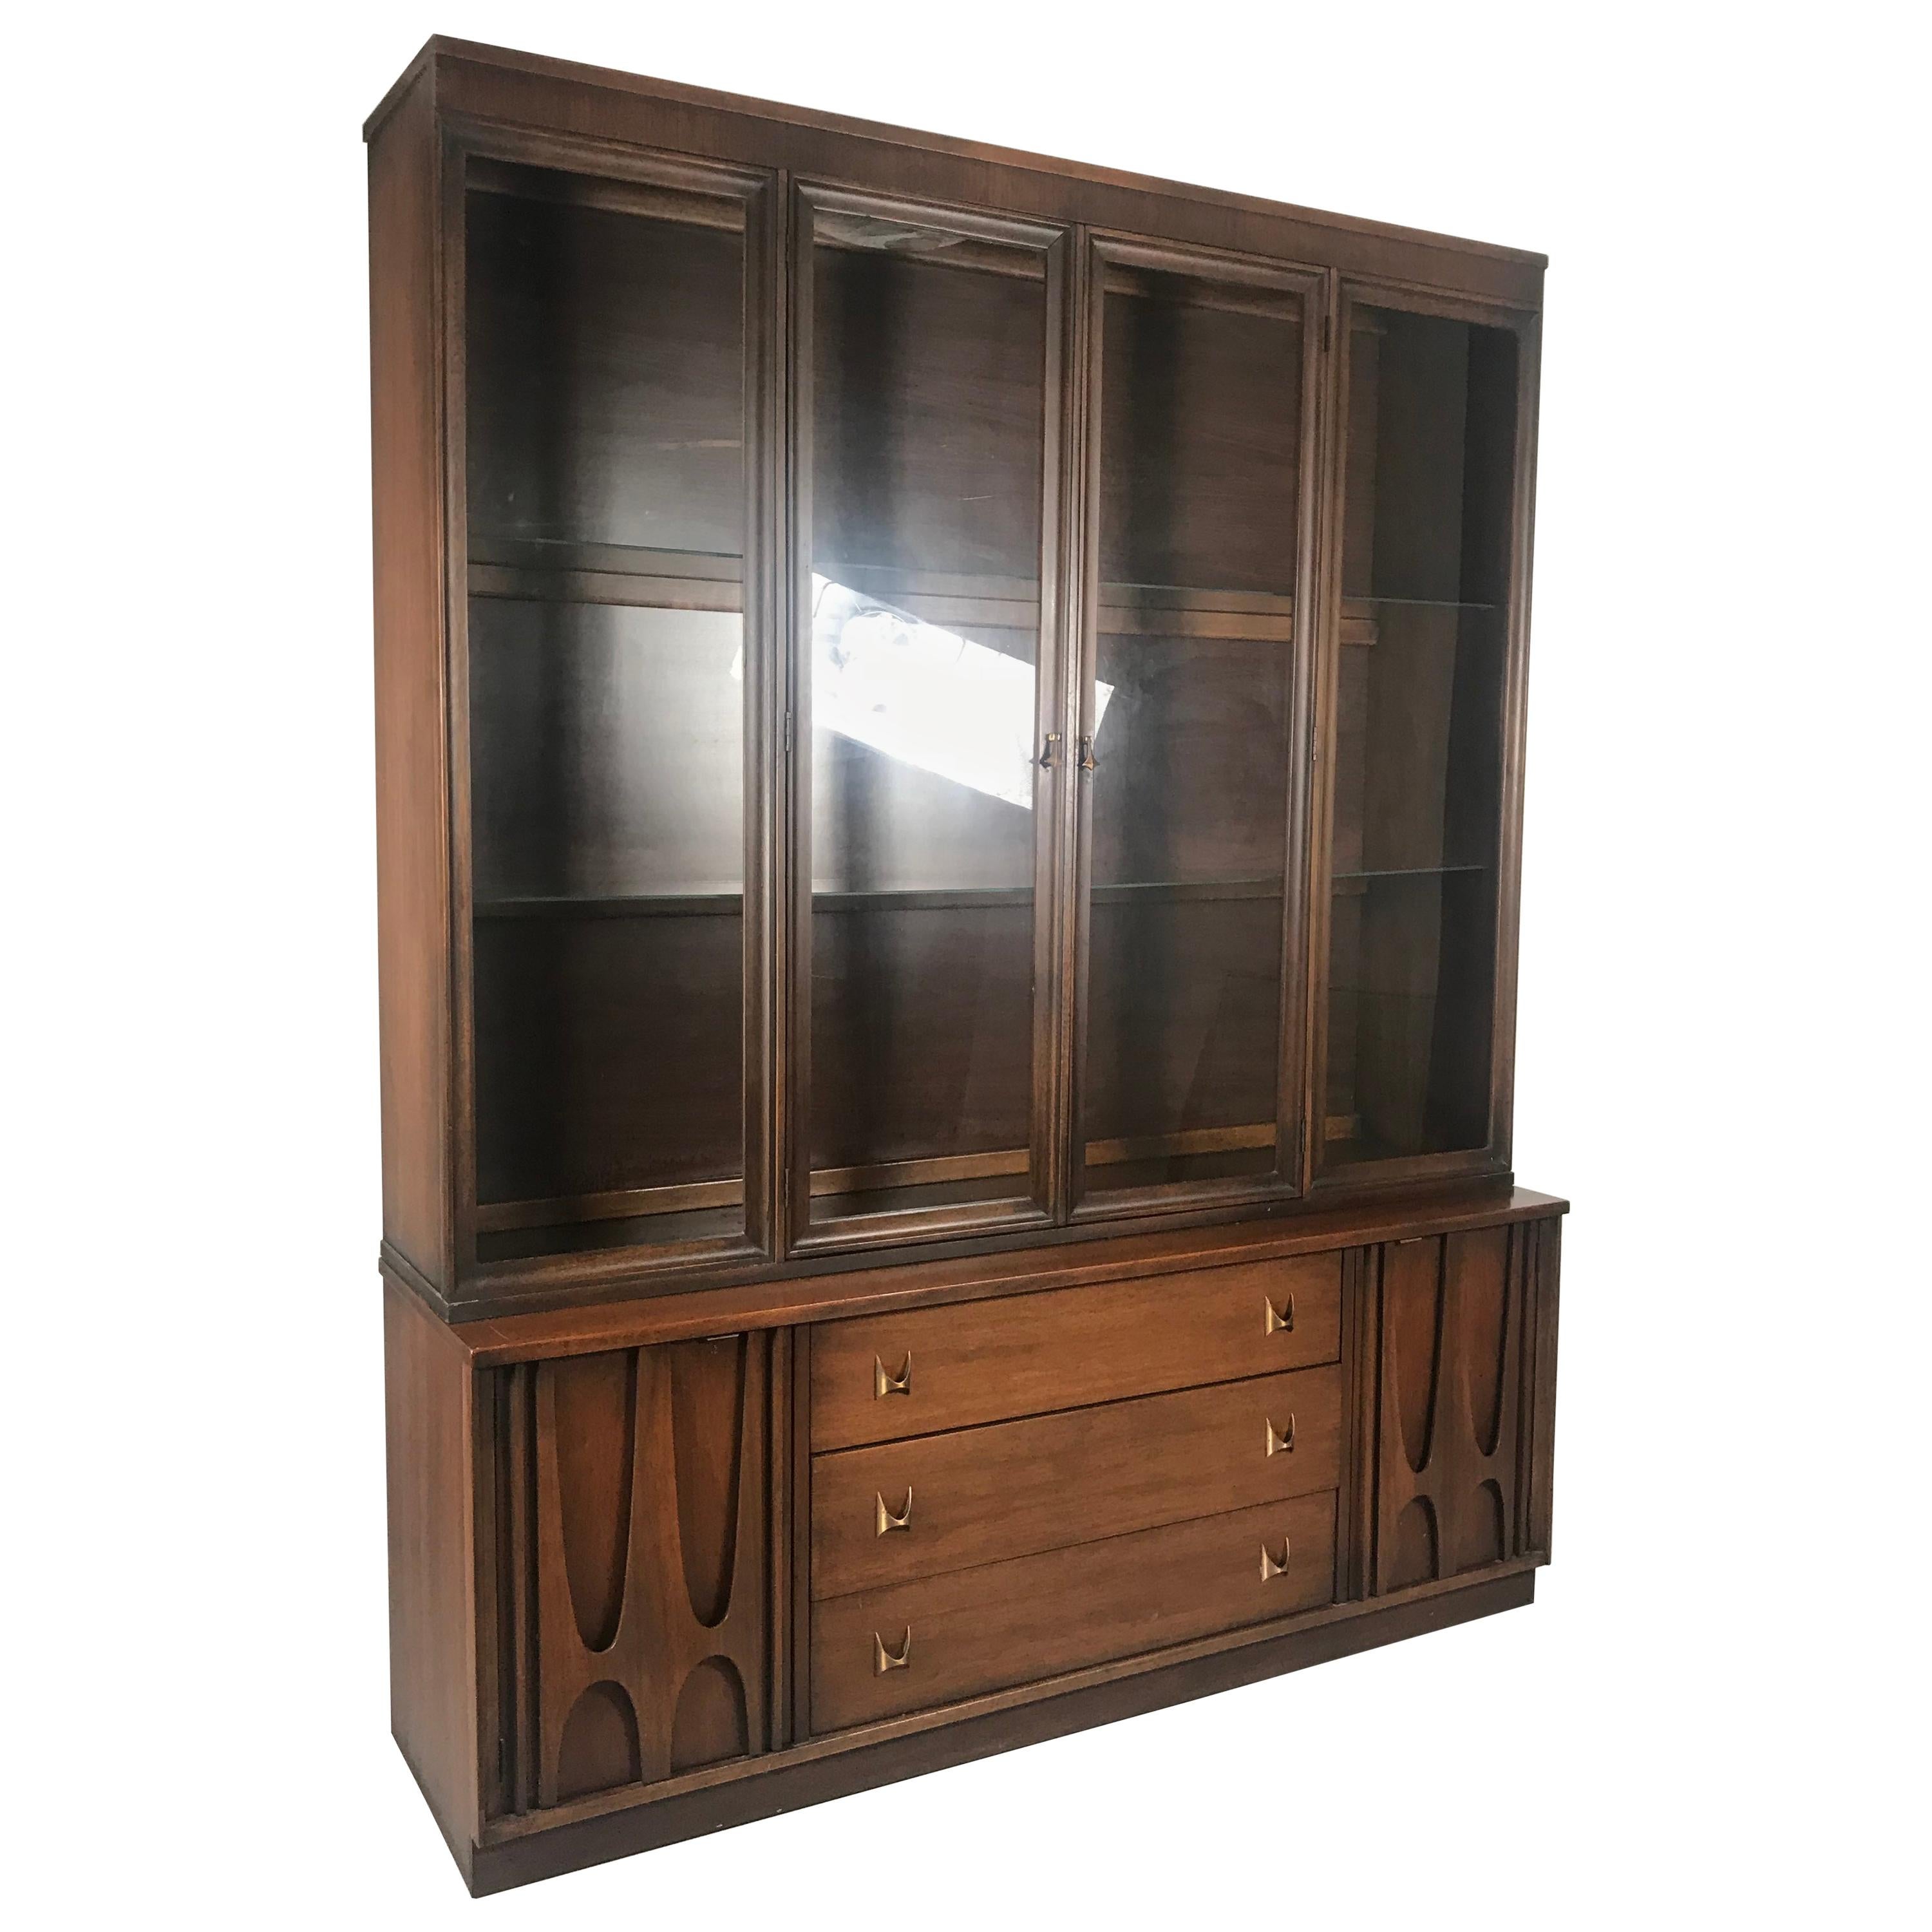 Sculpted Walnut Credenza by Broyhill Brasilia with Detachable China Hutch